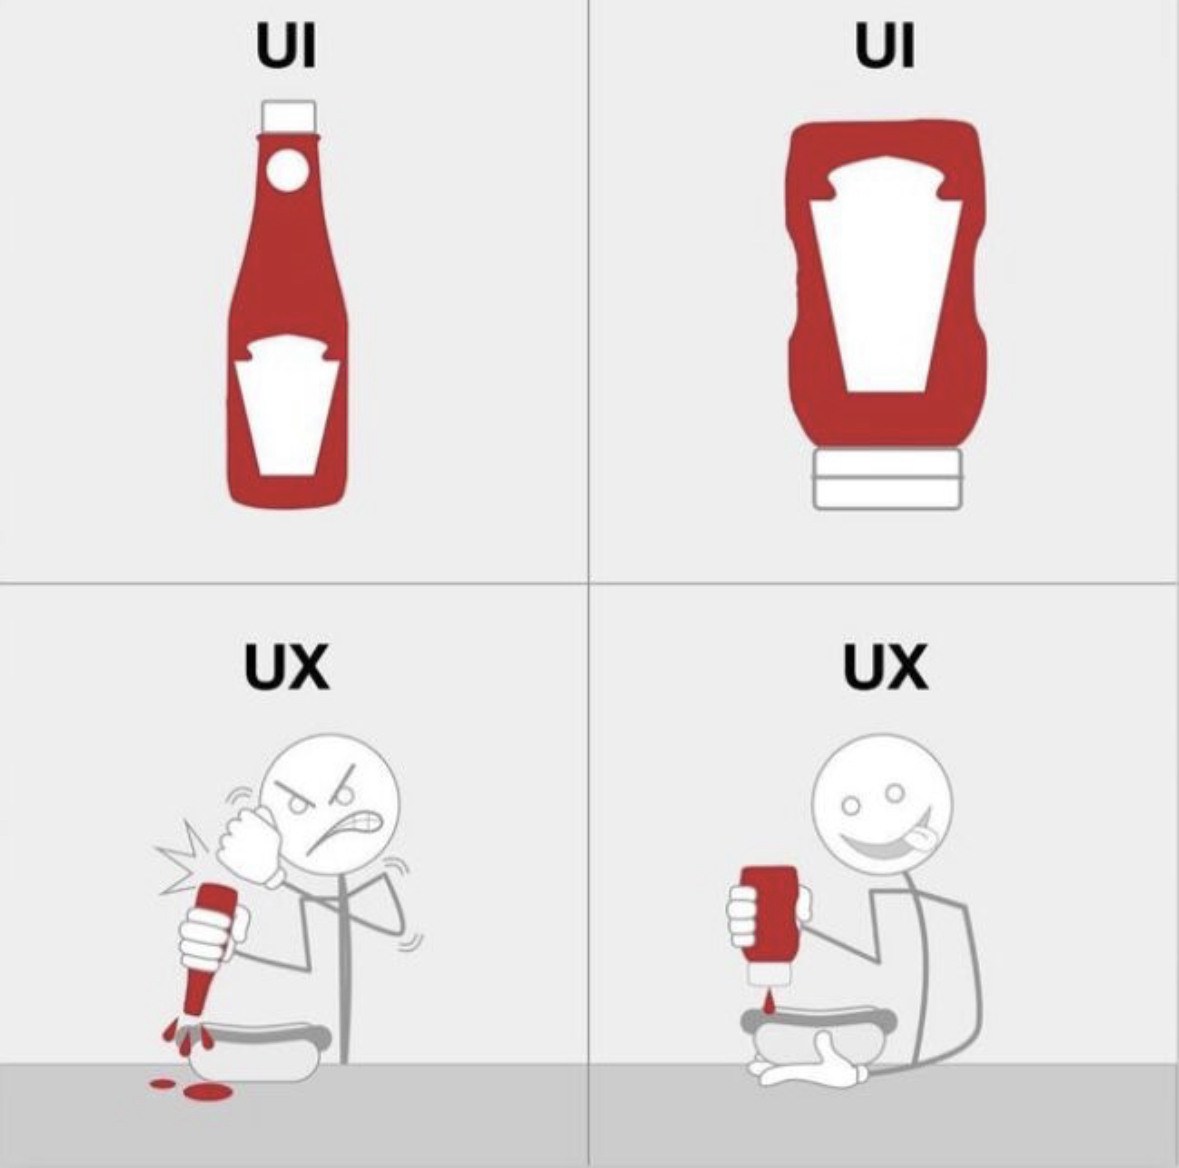 ux and ui difference with a bottle of ketchup